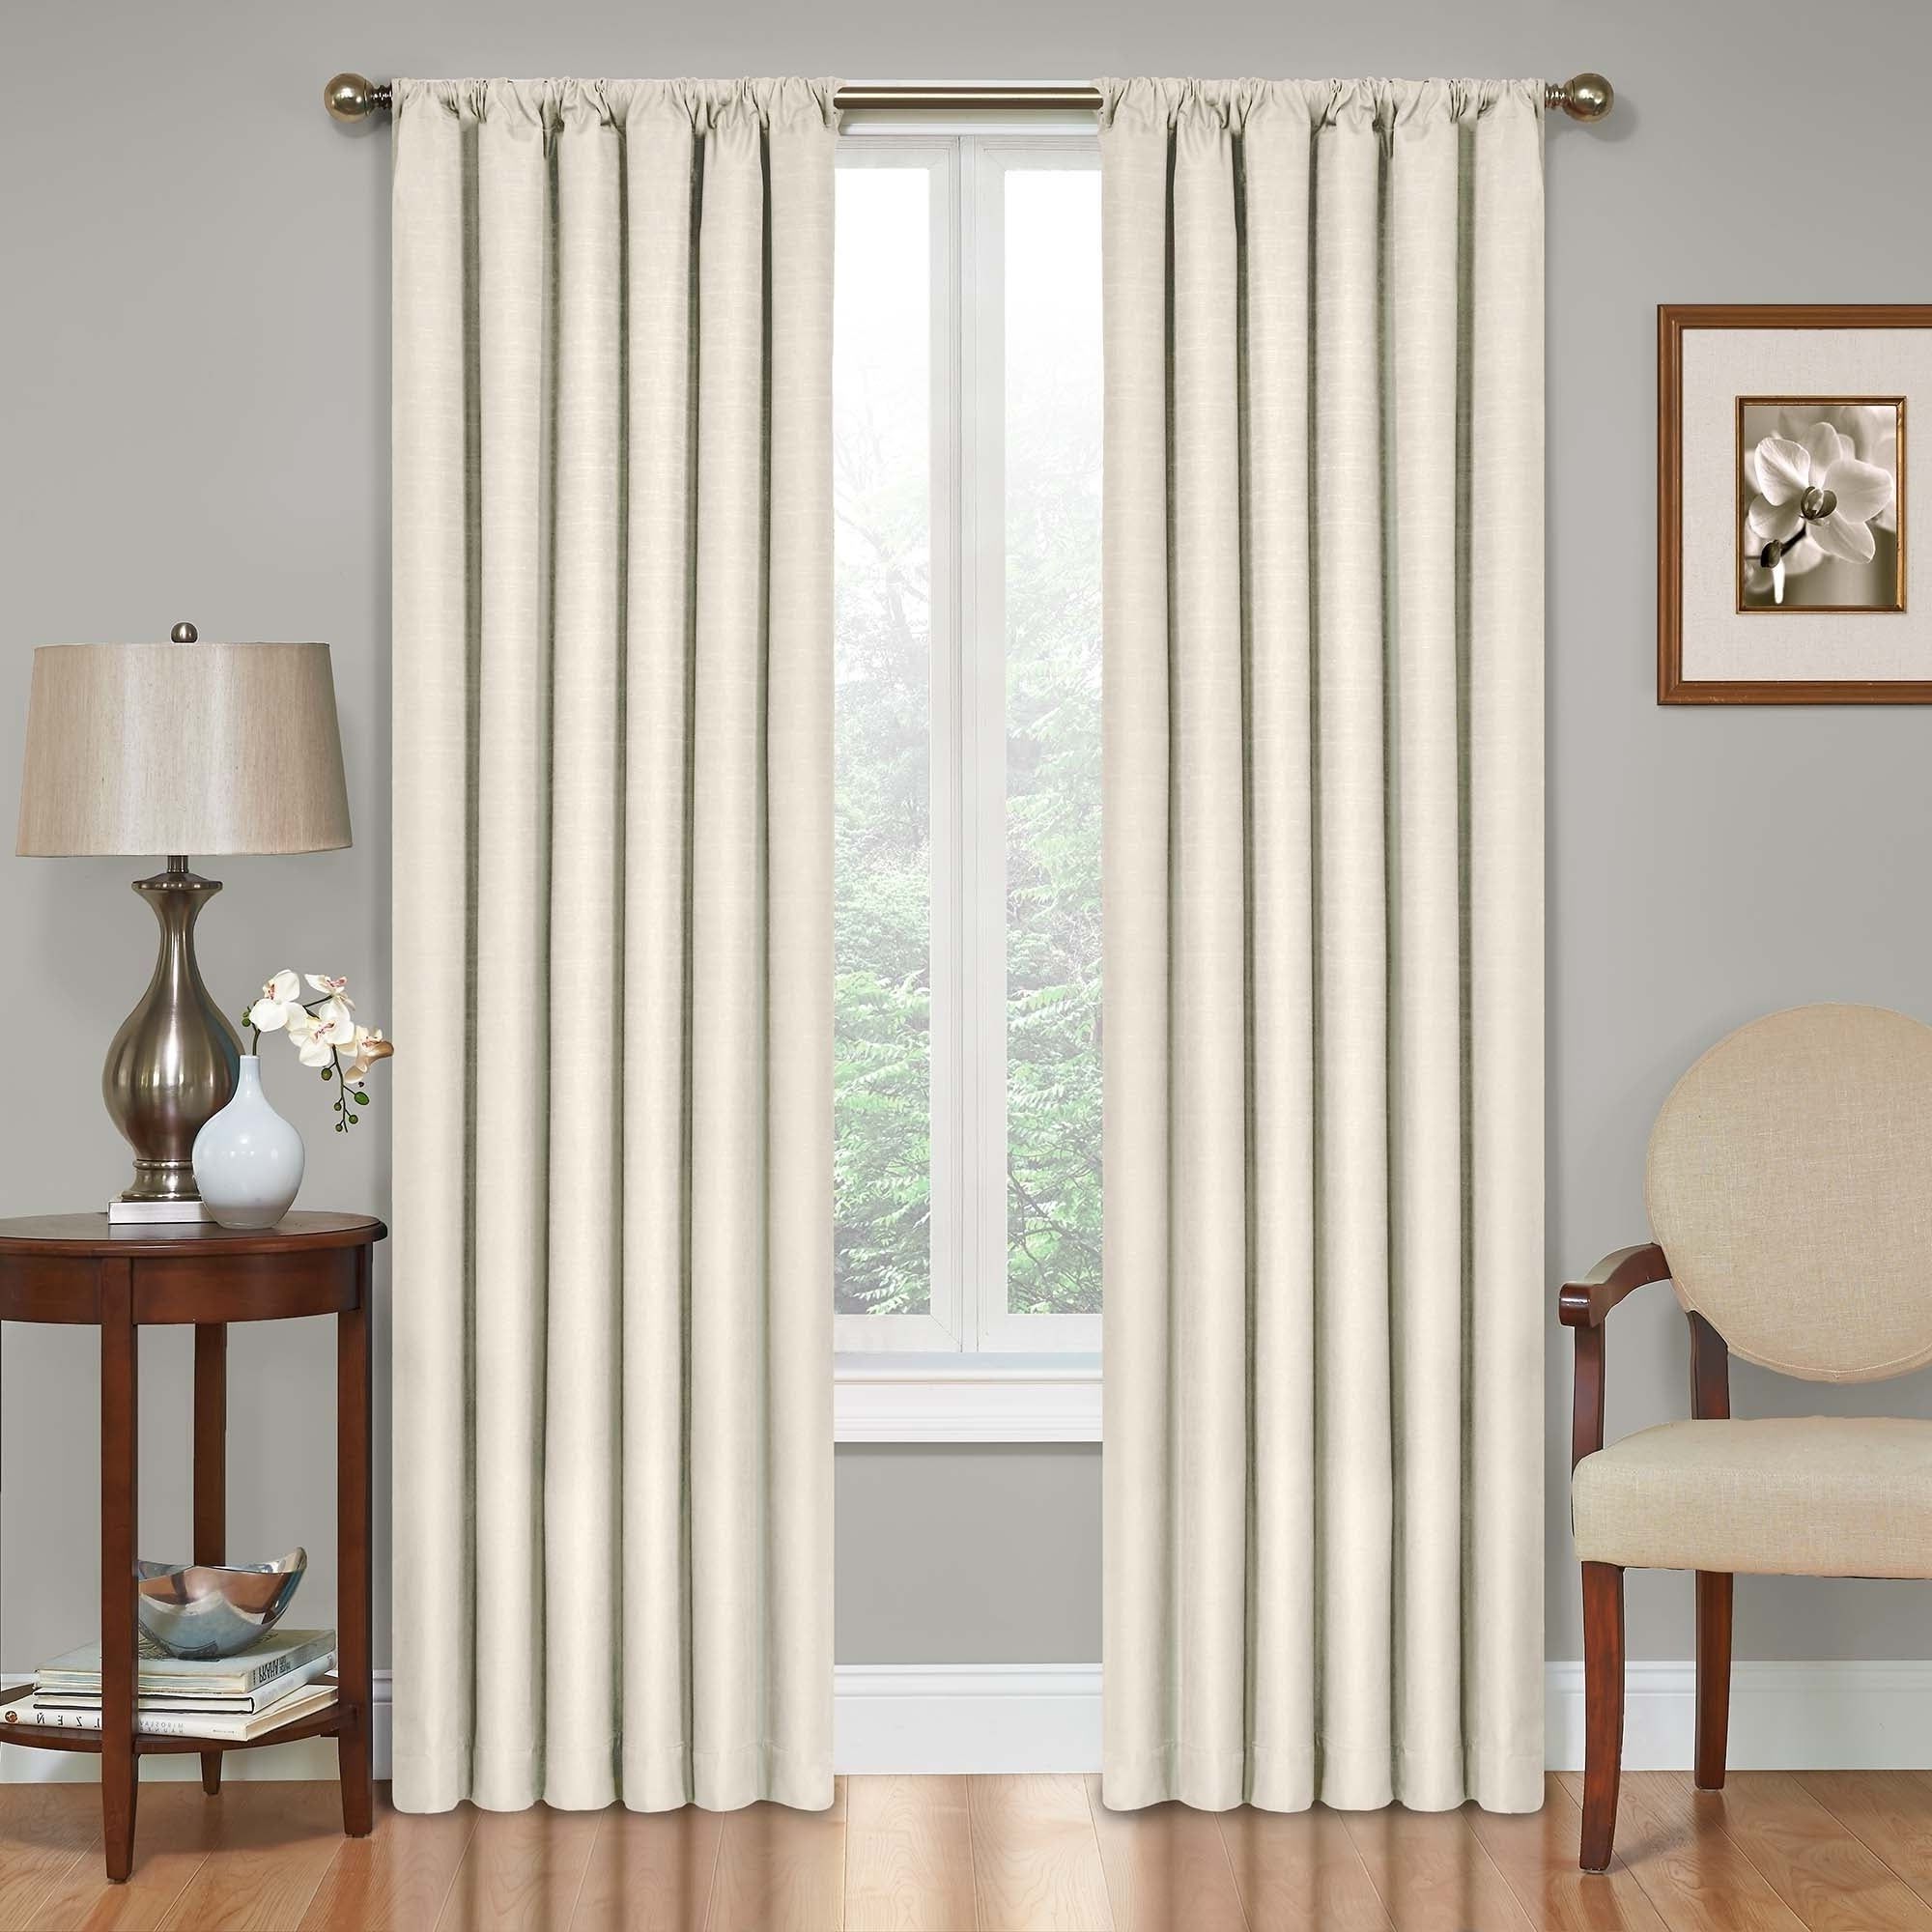 Eclipse Kendall Blackout Window Curtain Panel With Most Recent Eclipse Kendall Blackout Window Curtain Panels (View 3 of 20)